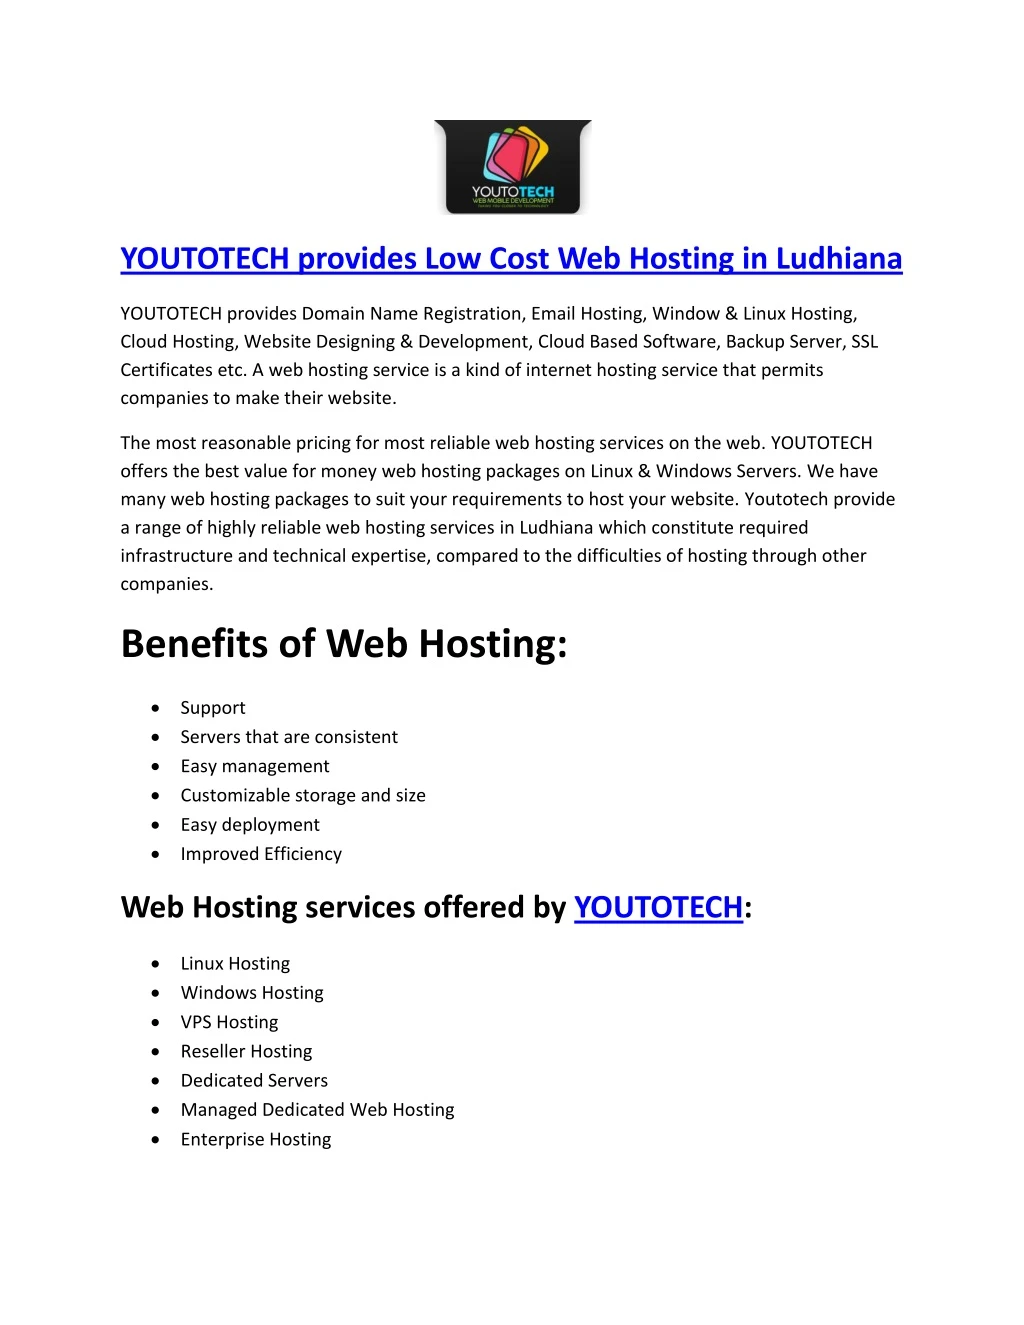 youtotech provides low cost web hosting